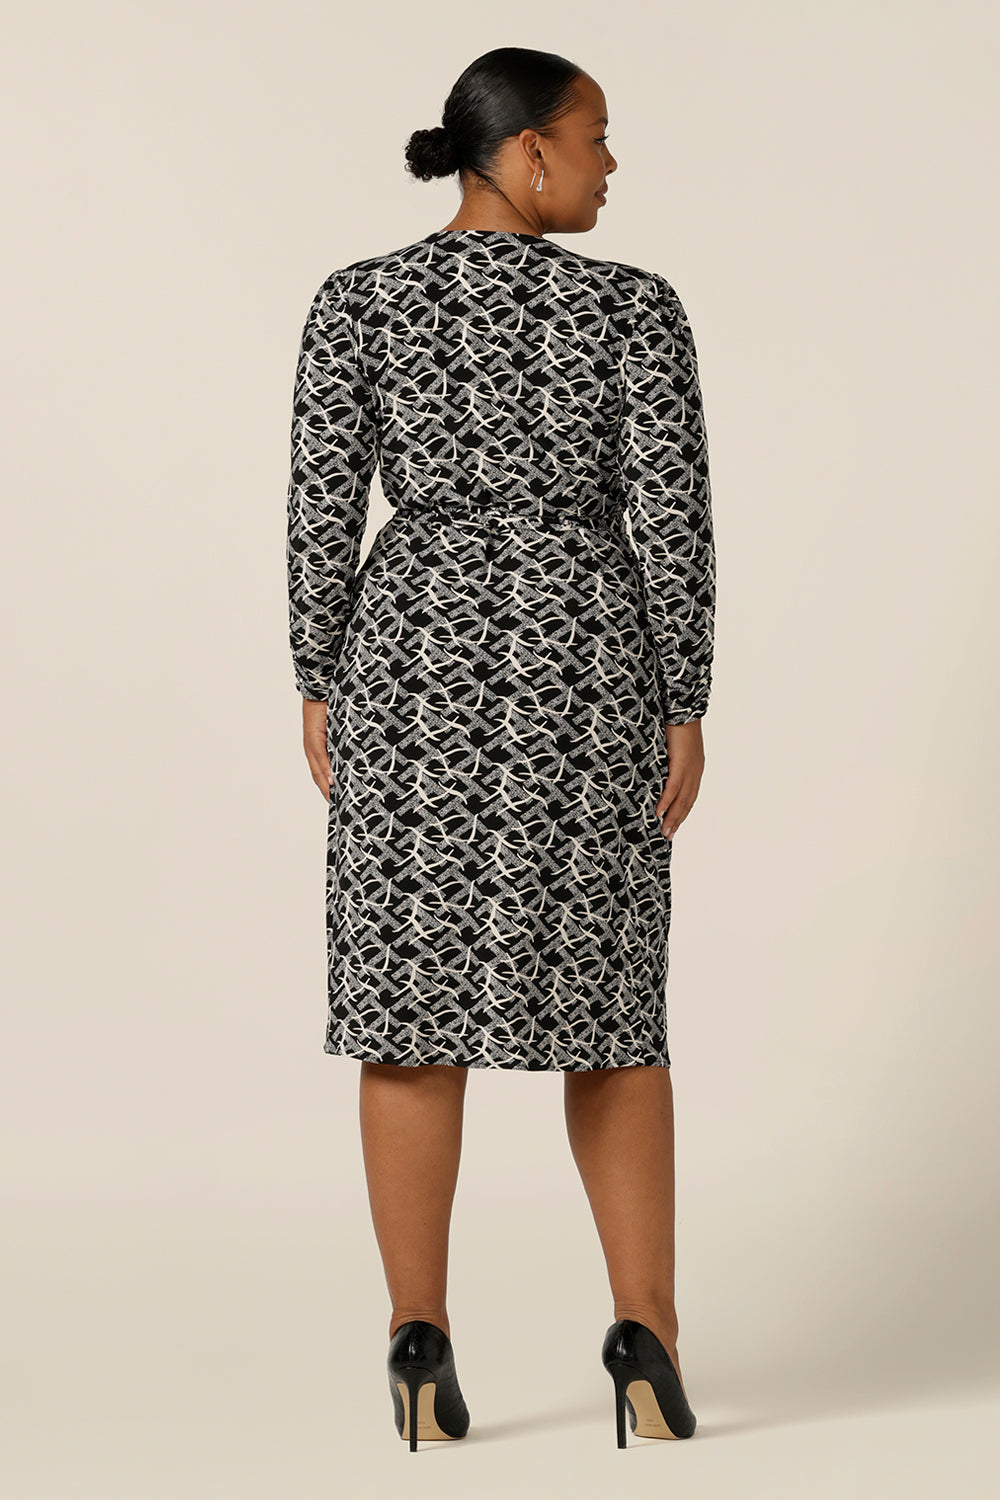 Back view of a long sleeve, black and white print, wrap dress with tulip skirt by Australian and New Zealand women's clothing label, L&F. Worn by a plus size woman, this jersey wrap dress is available in inclusive sizes, 8 to 24.